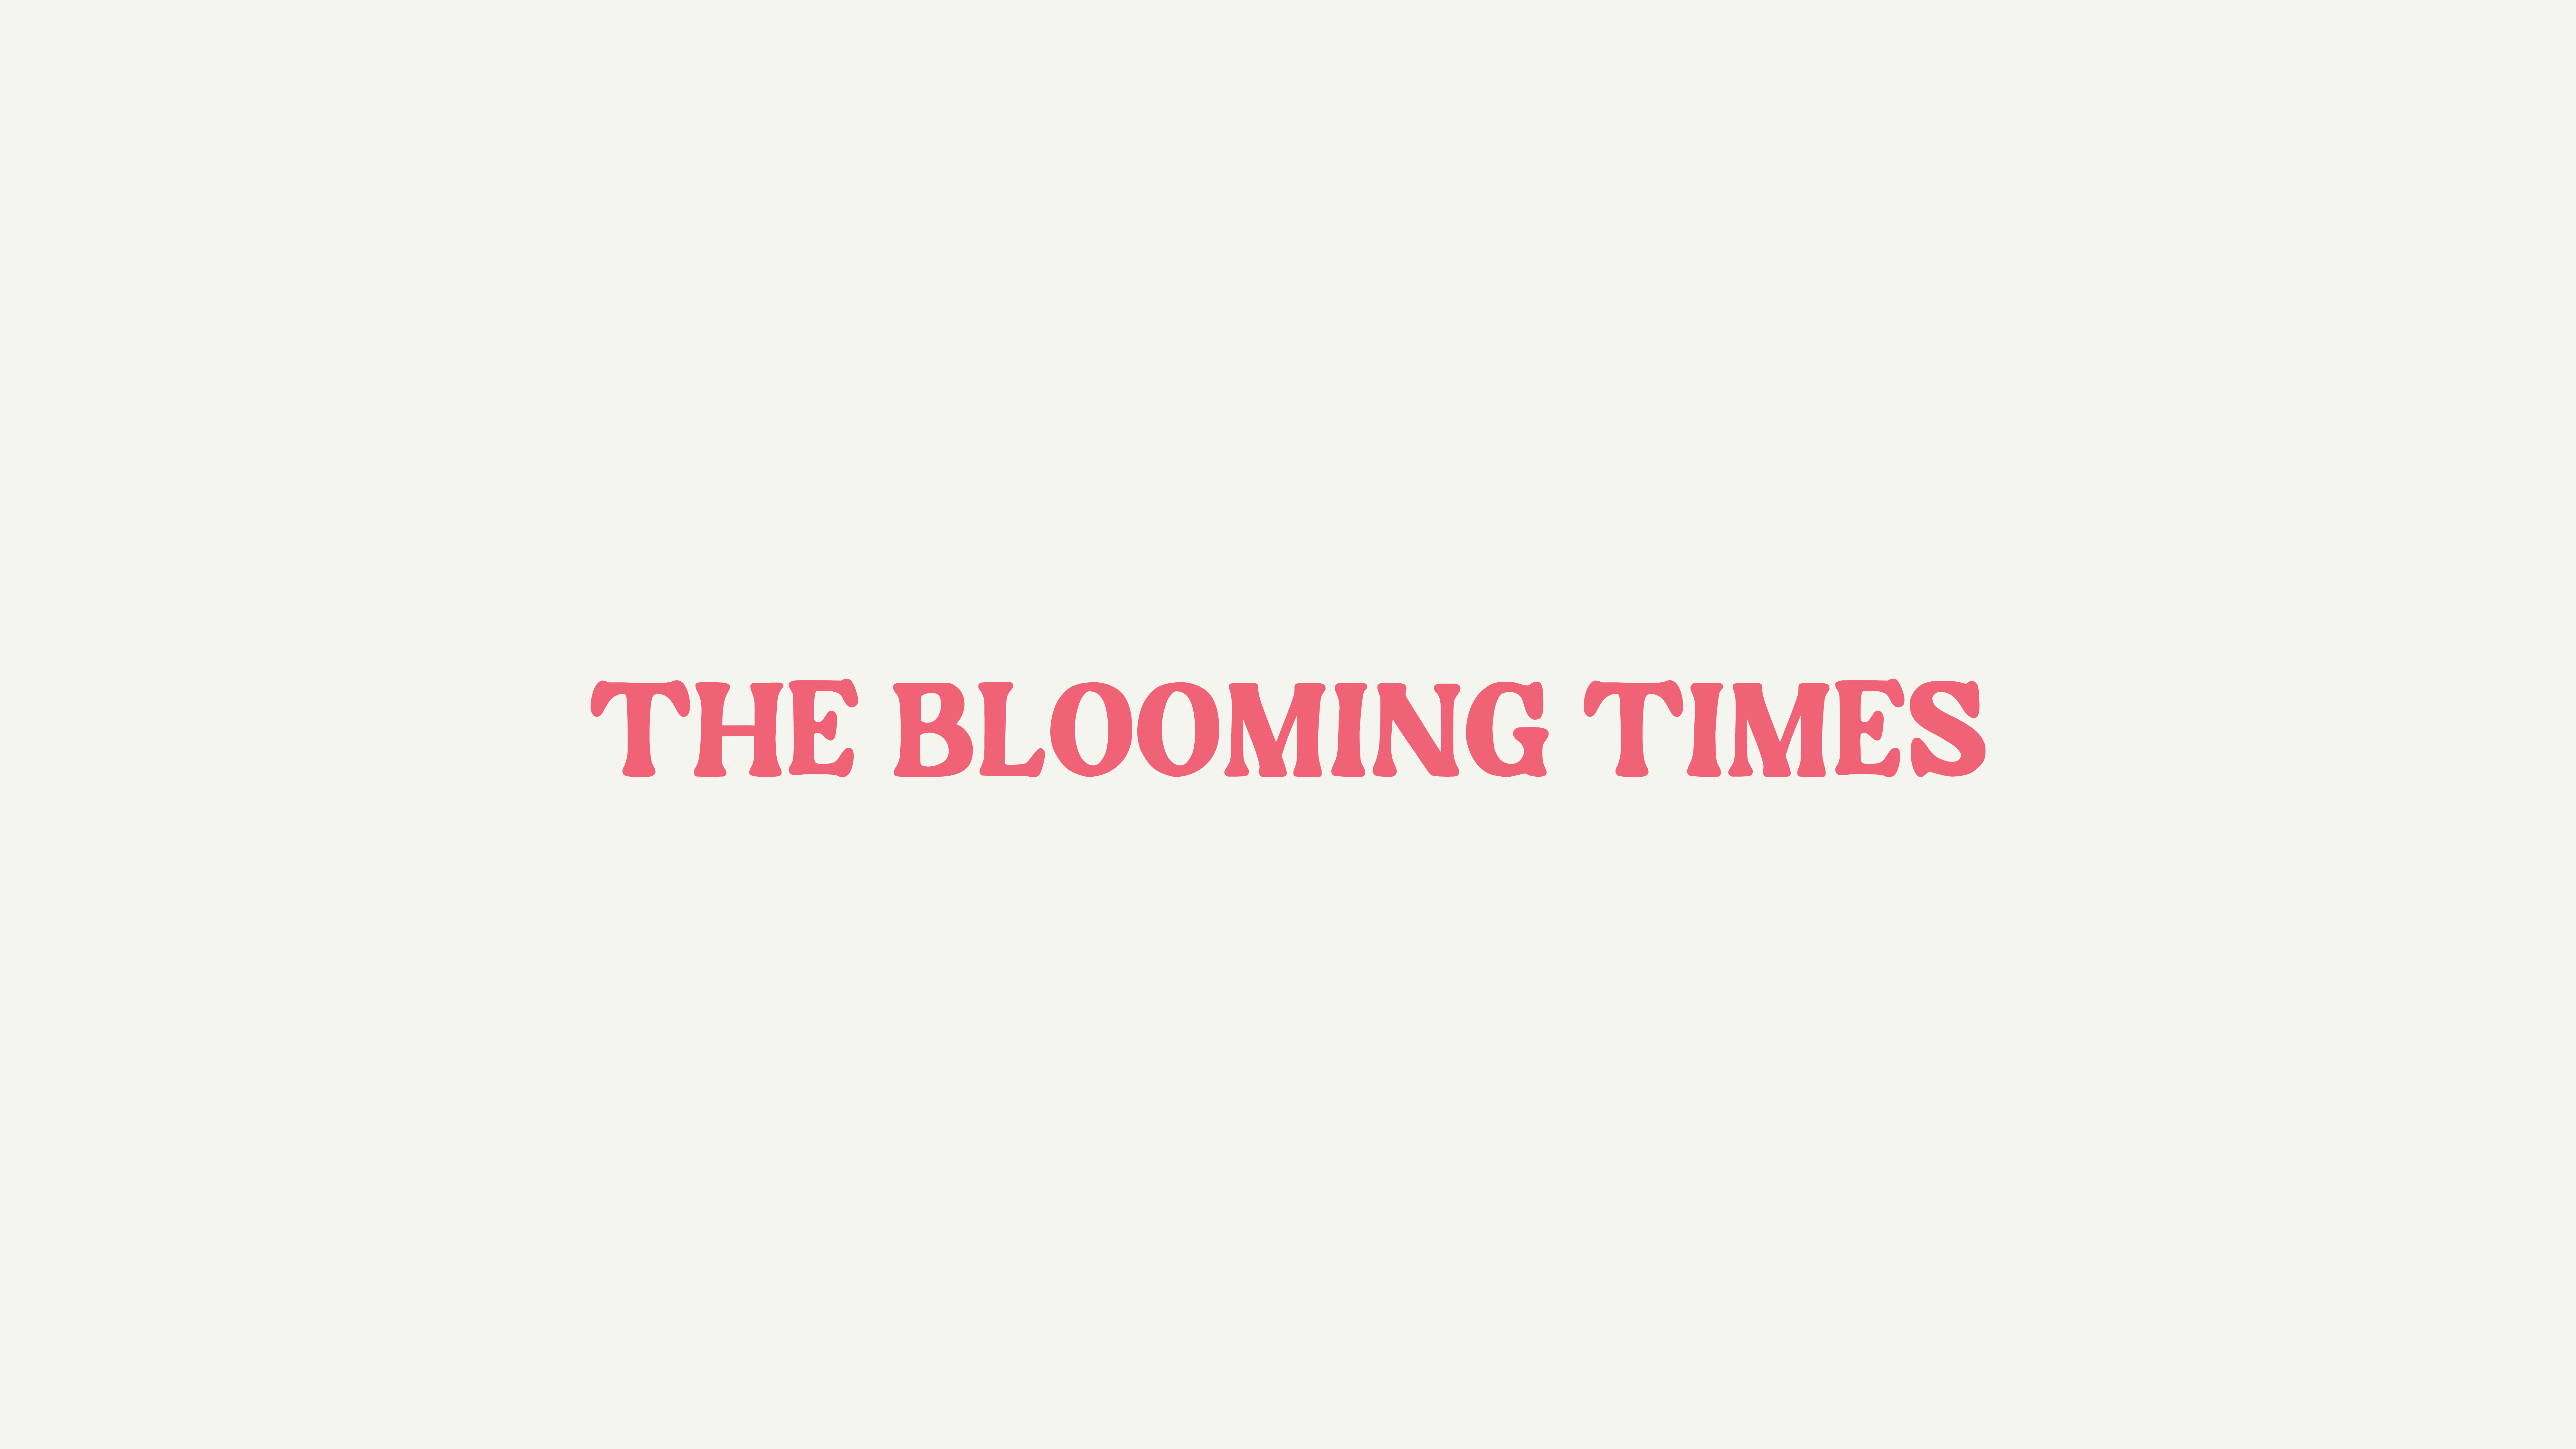 The Blooming Times